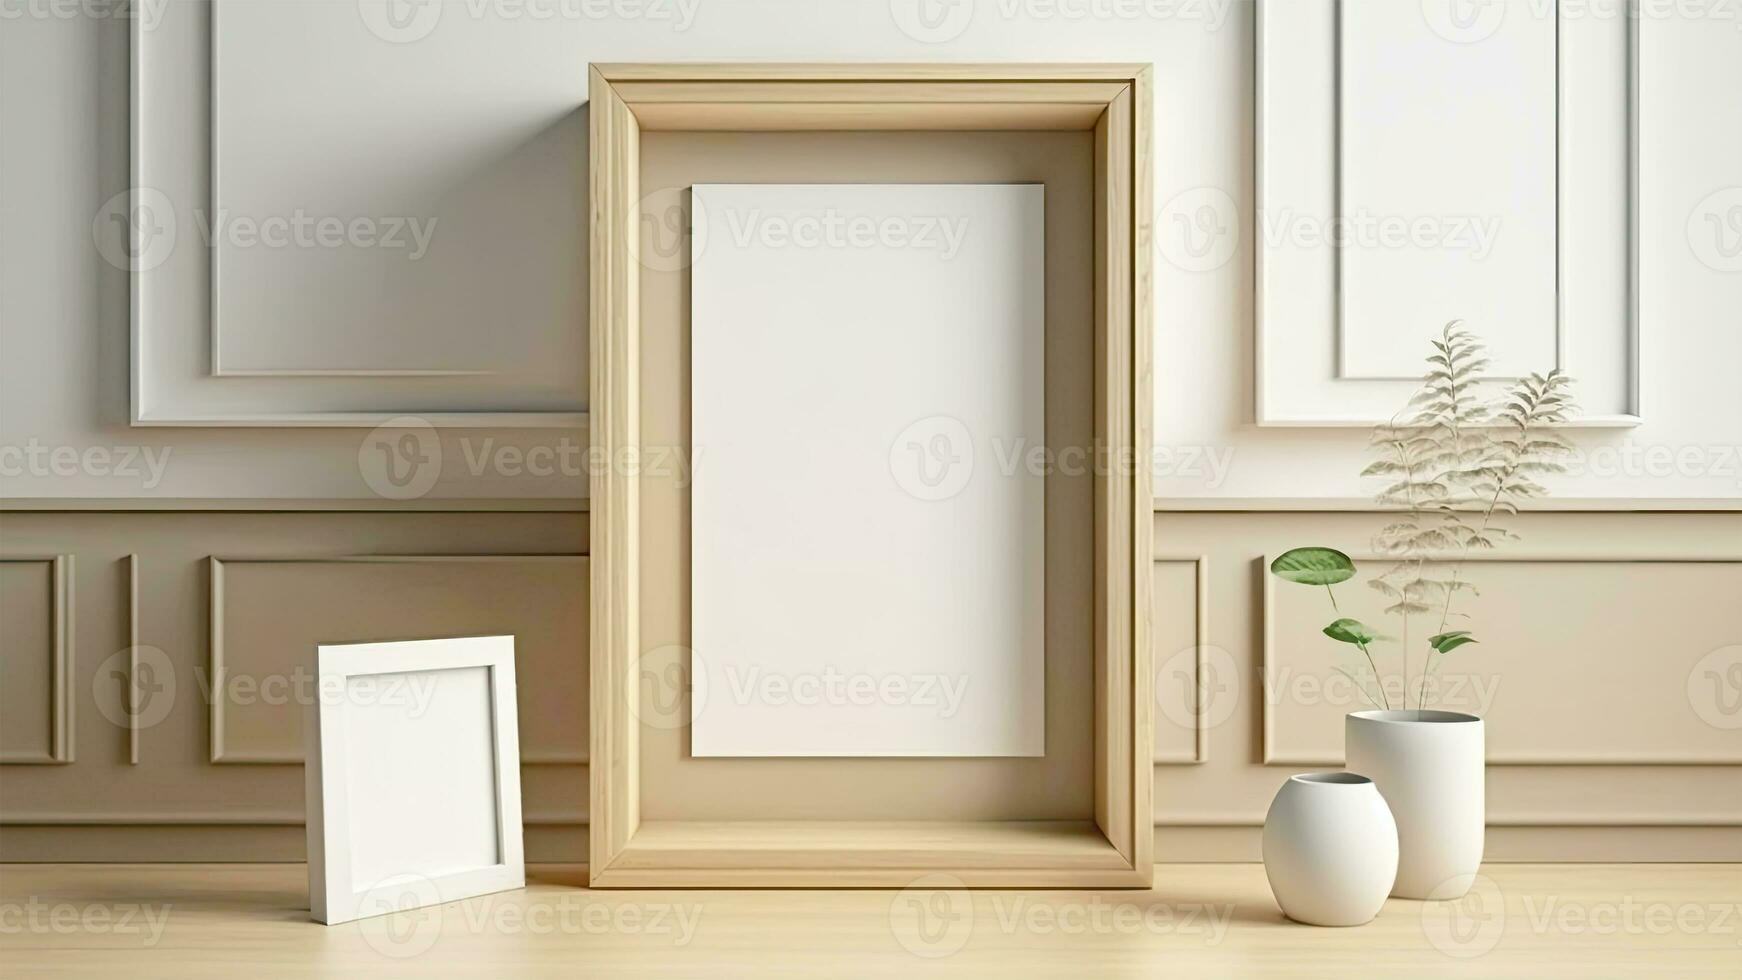 3D Render of Wooden Frames Mockup With Image Placeholder And Plant Pots On Classic Interior Wall Mockup. photo